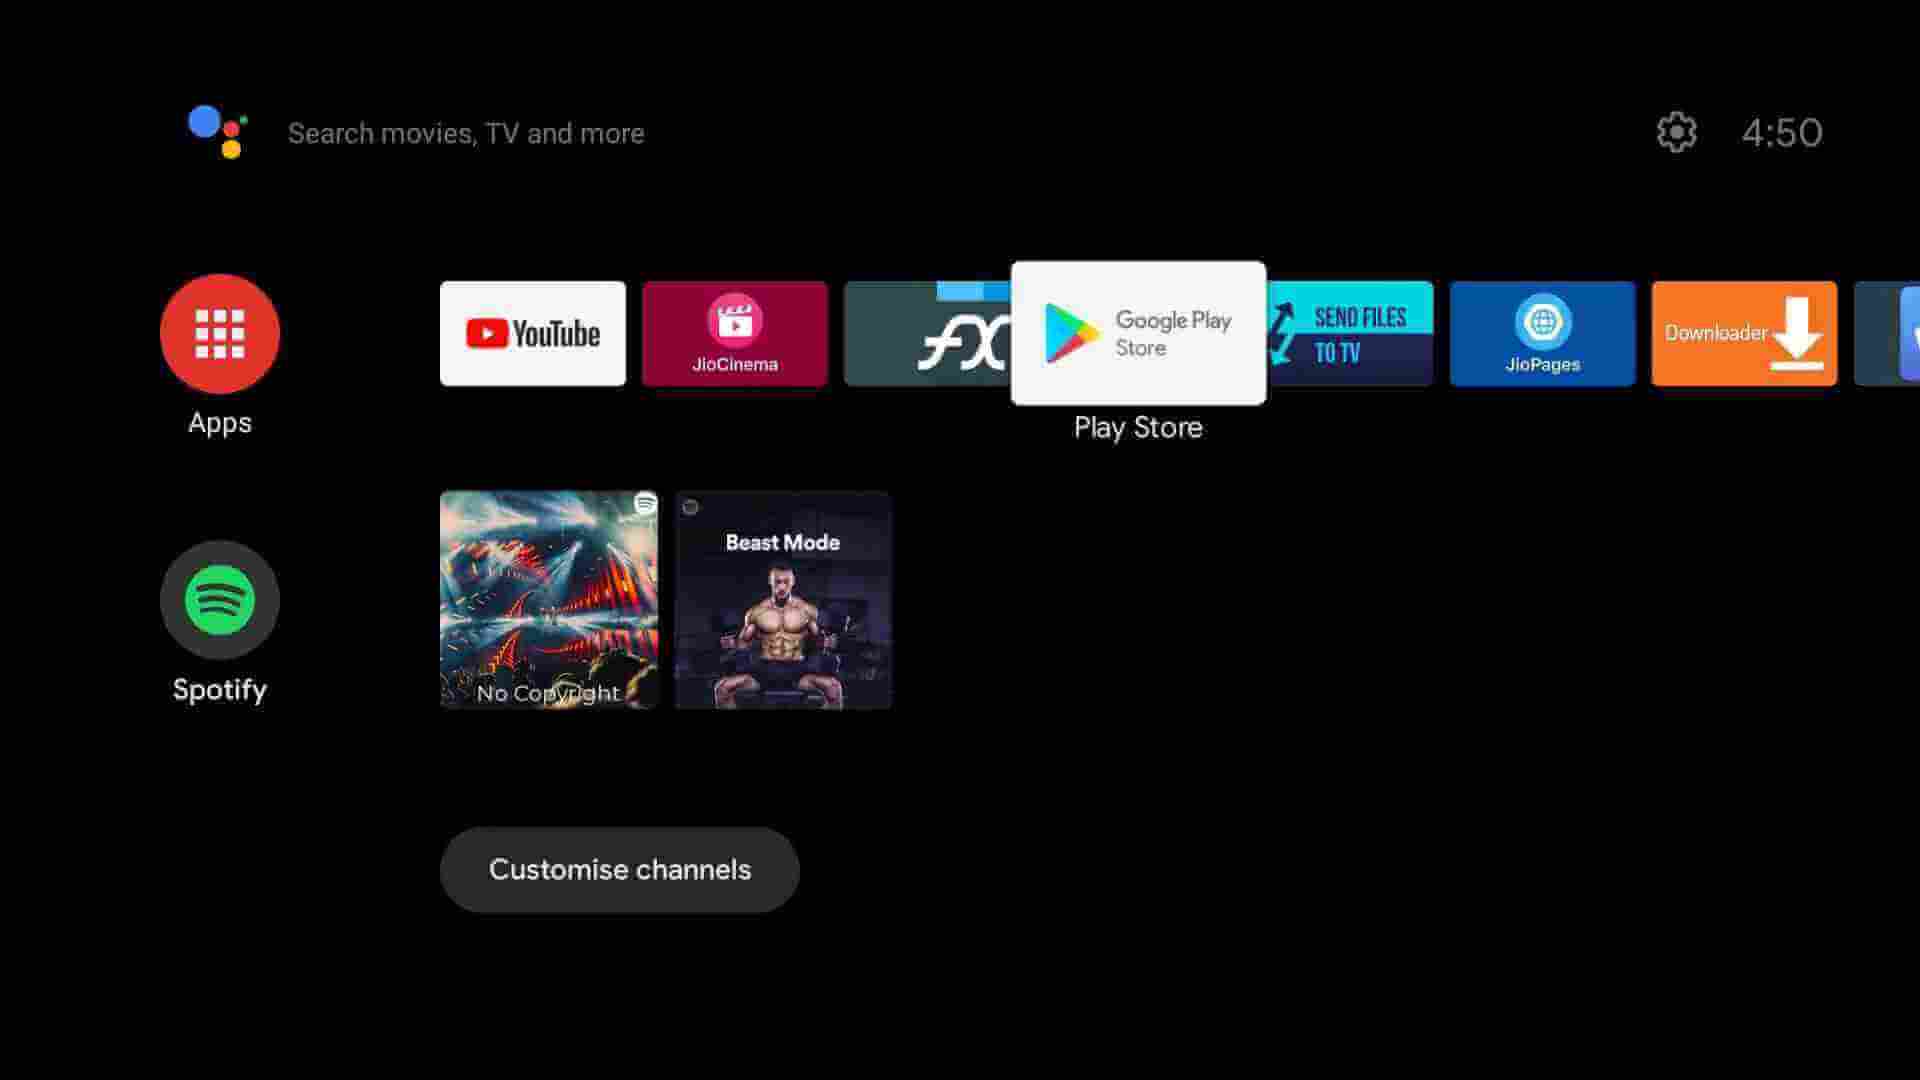 Google Play Store On Android TV